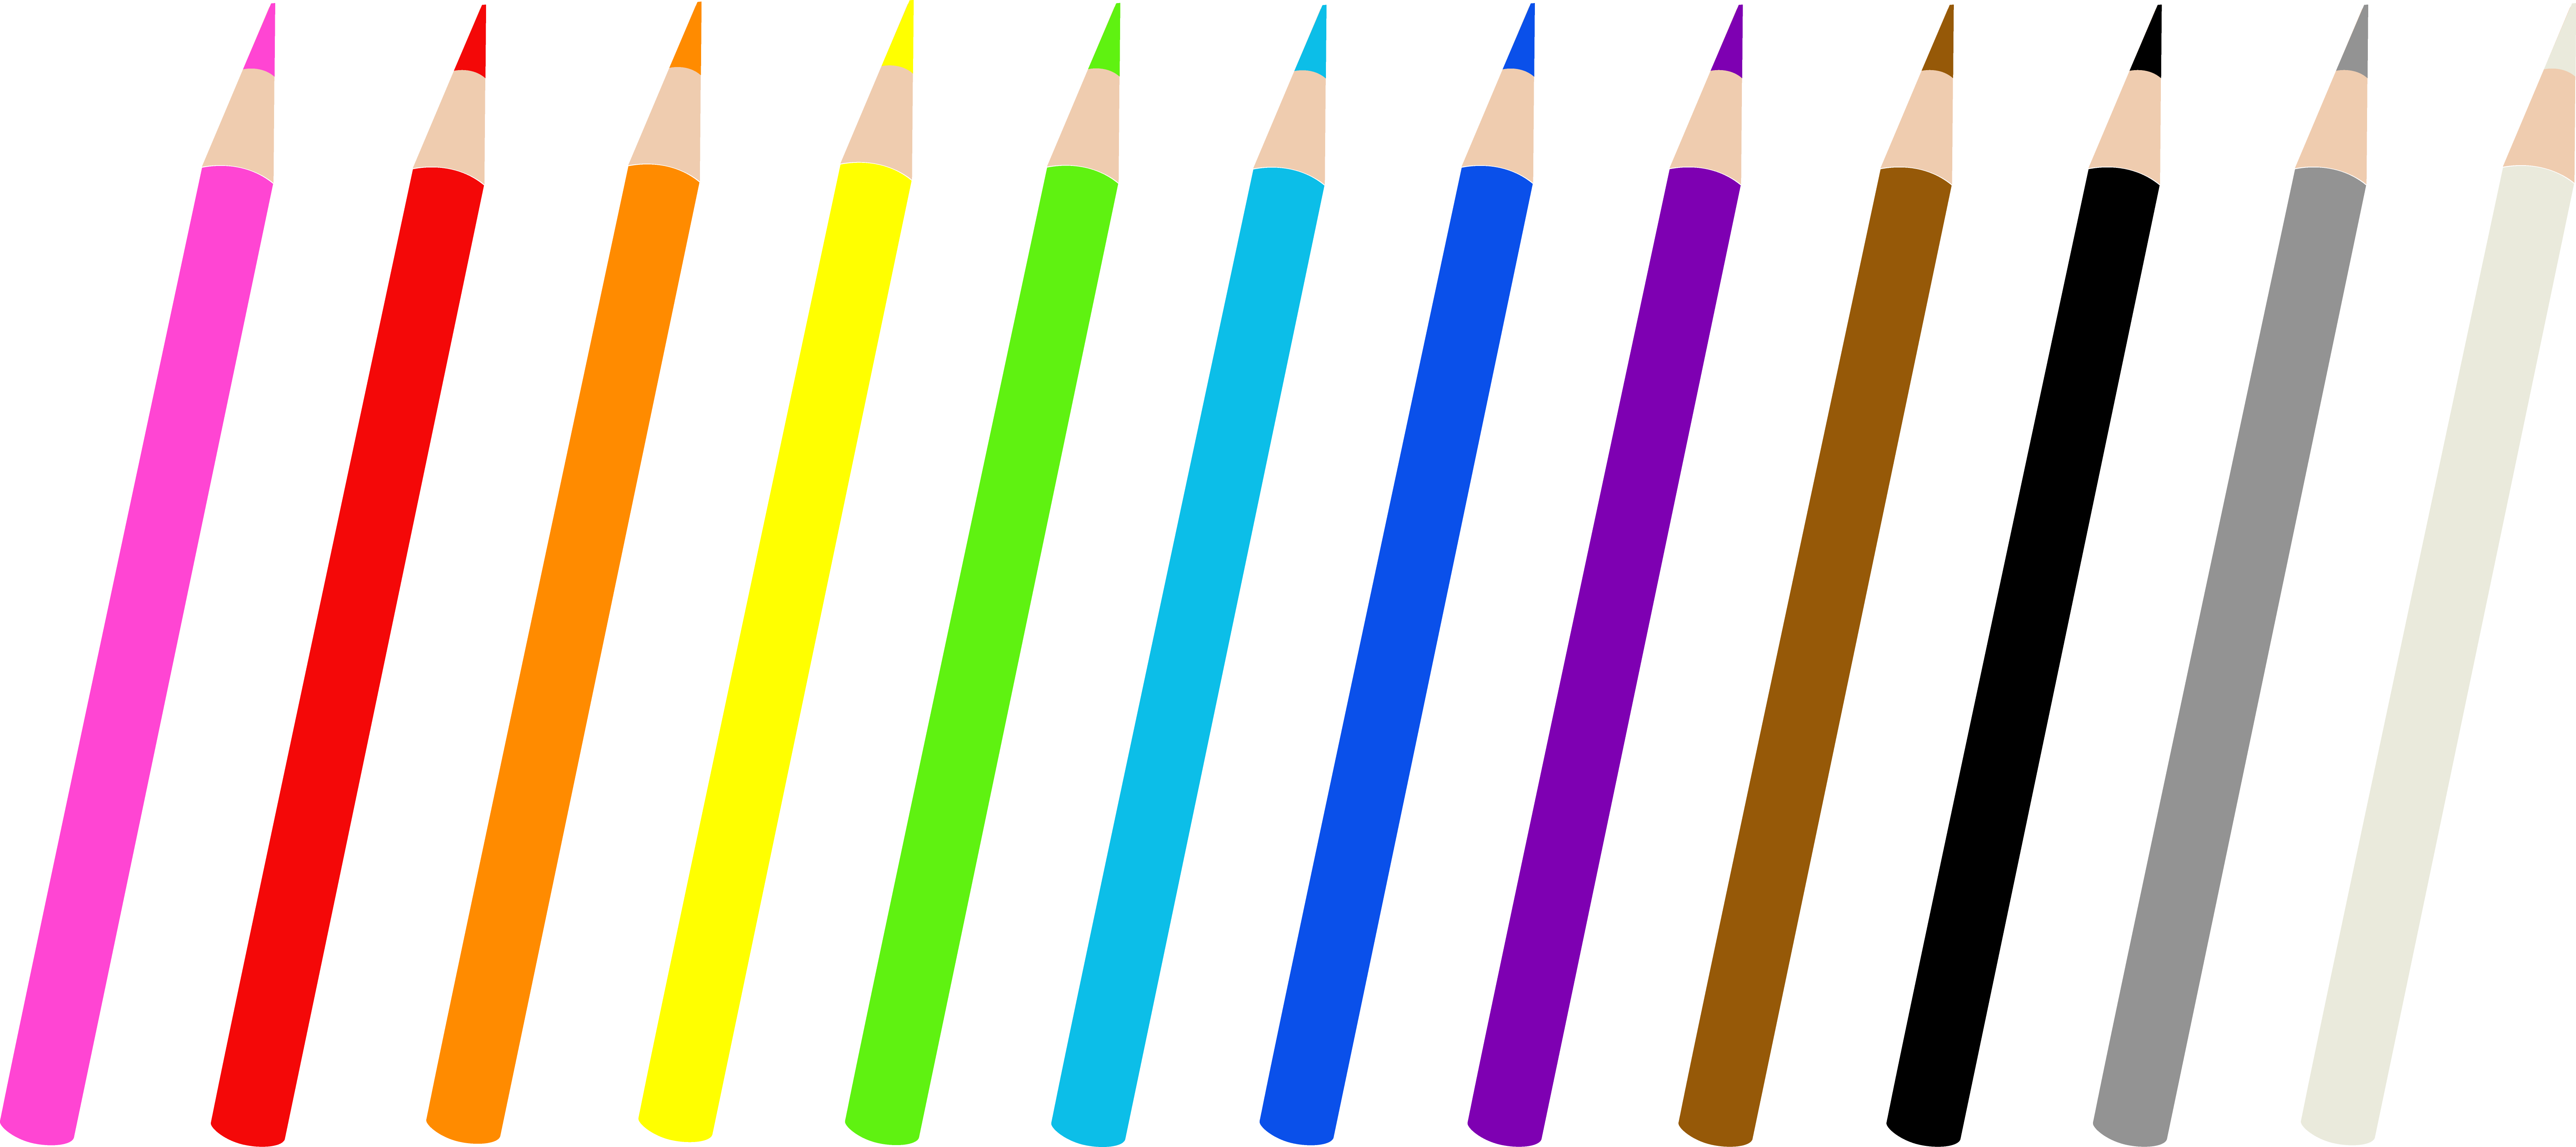 Free Colored Pencils Clipart, Download Free Clip Art, Free ...